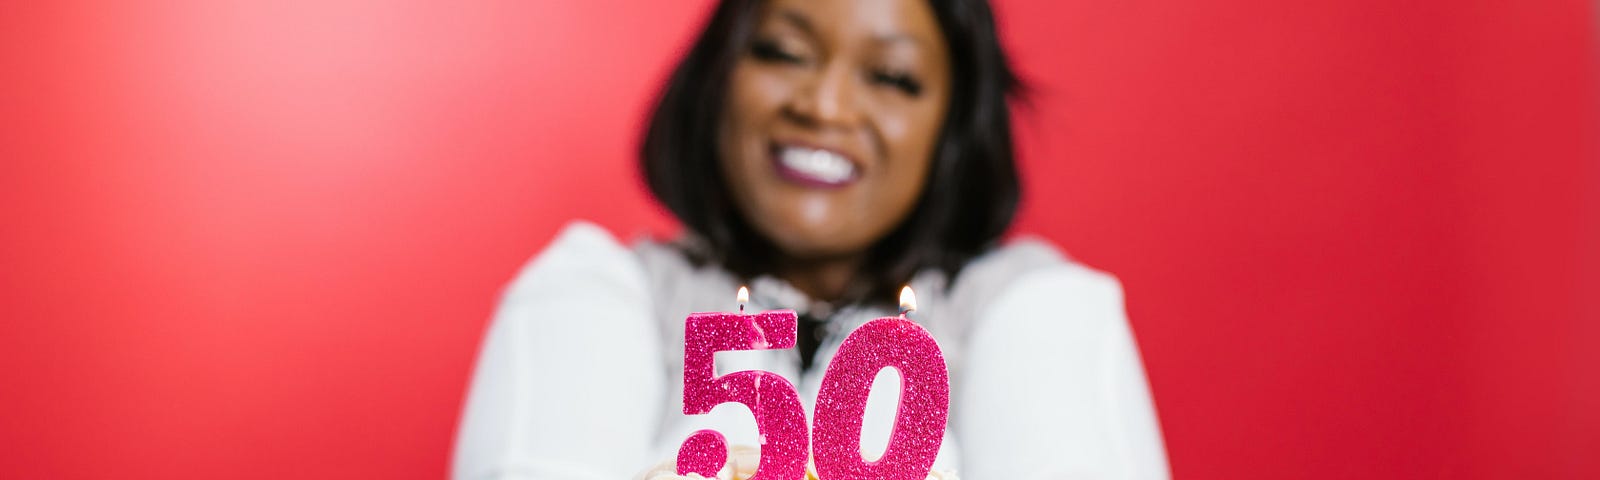 A Black woman with shoulder length straight hair and a party hat wears a white jumper with a pink number 50 on the front. She is smiling and holding a birthday cake, against a red backdrop